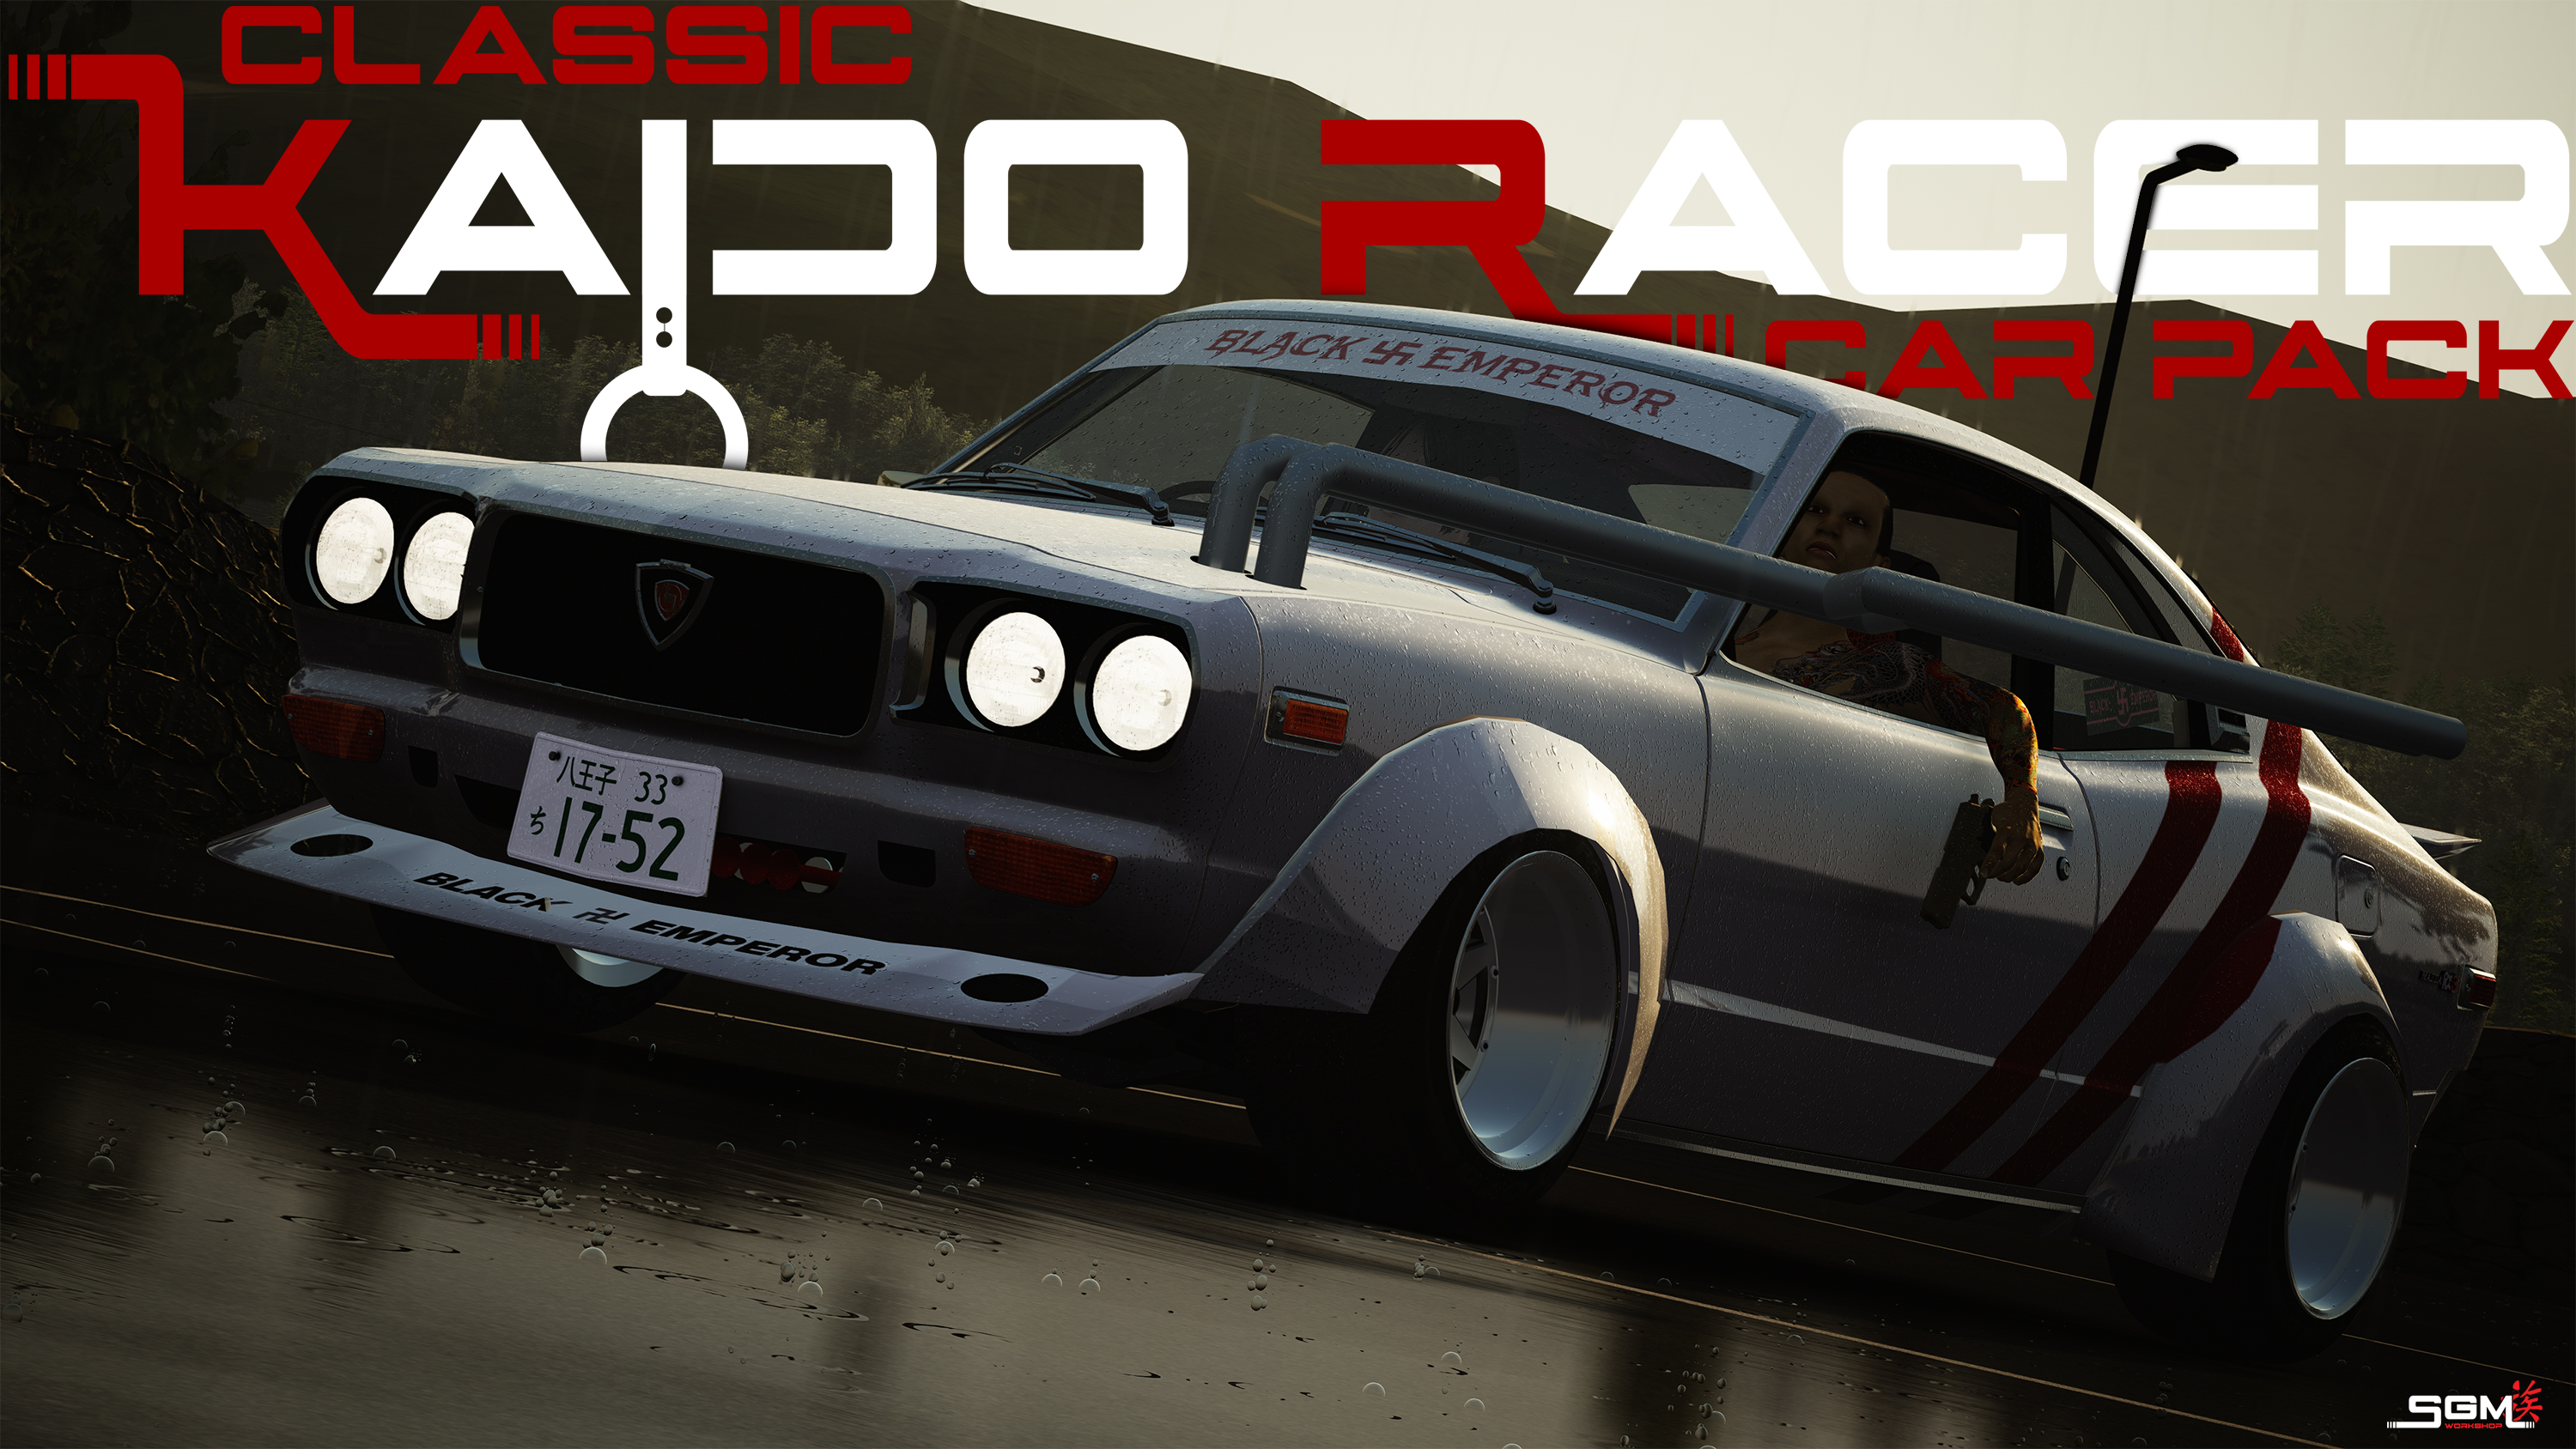 Kaido Racer - Mazda RX-3 GT [SGM WORKSHOP] Preview Image